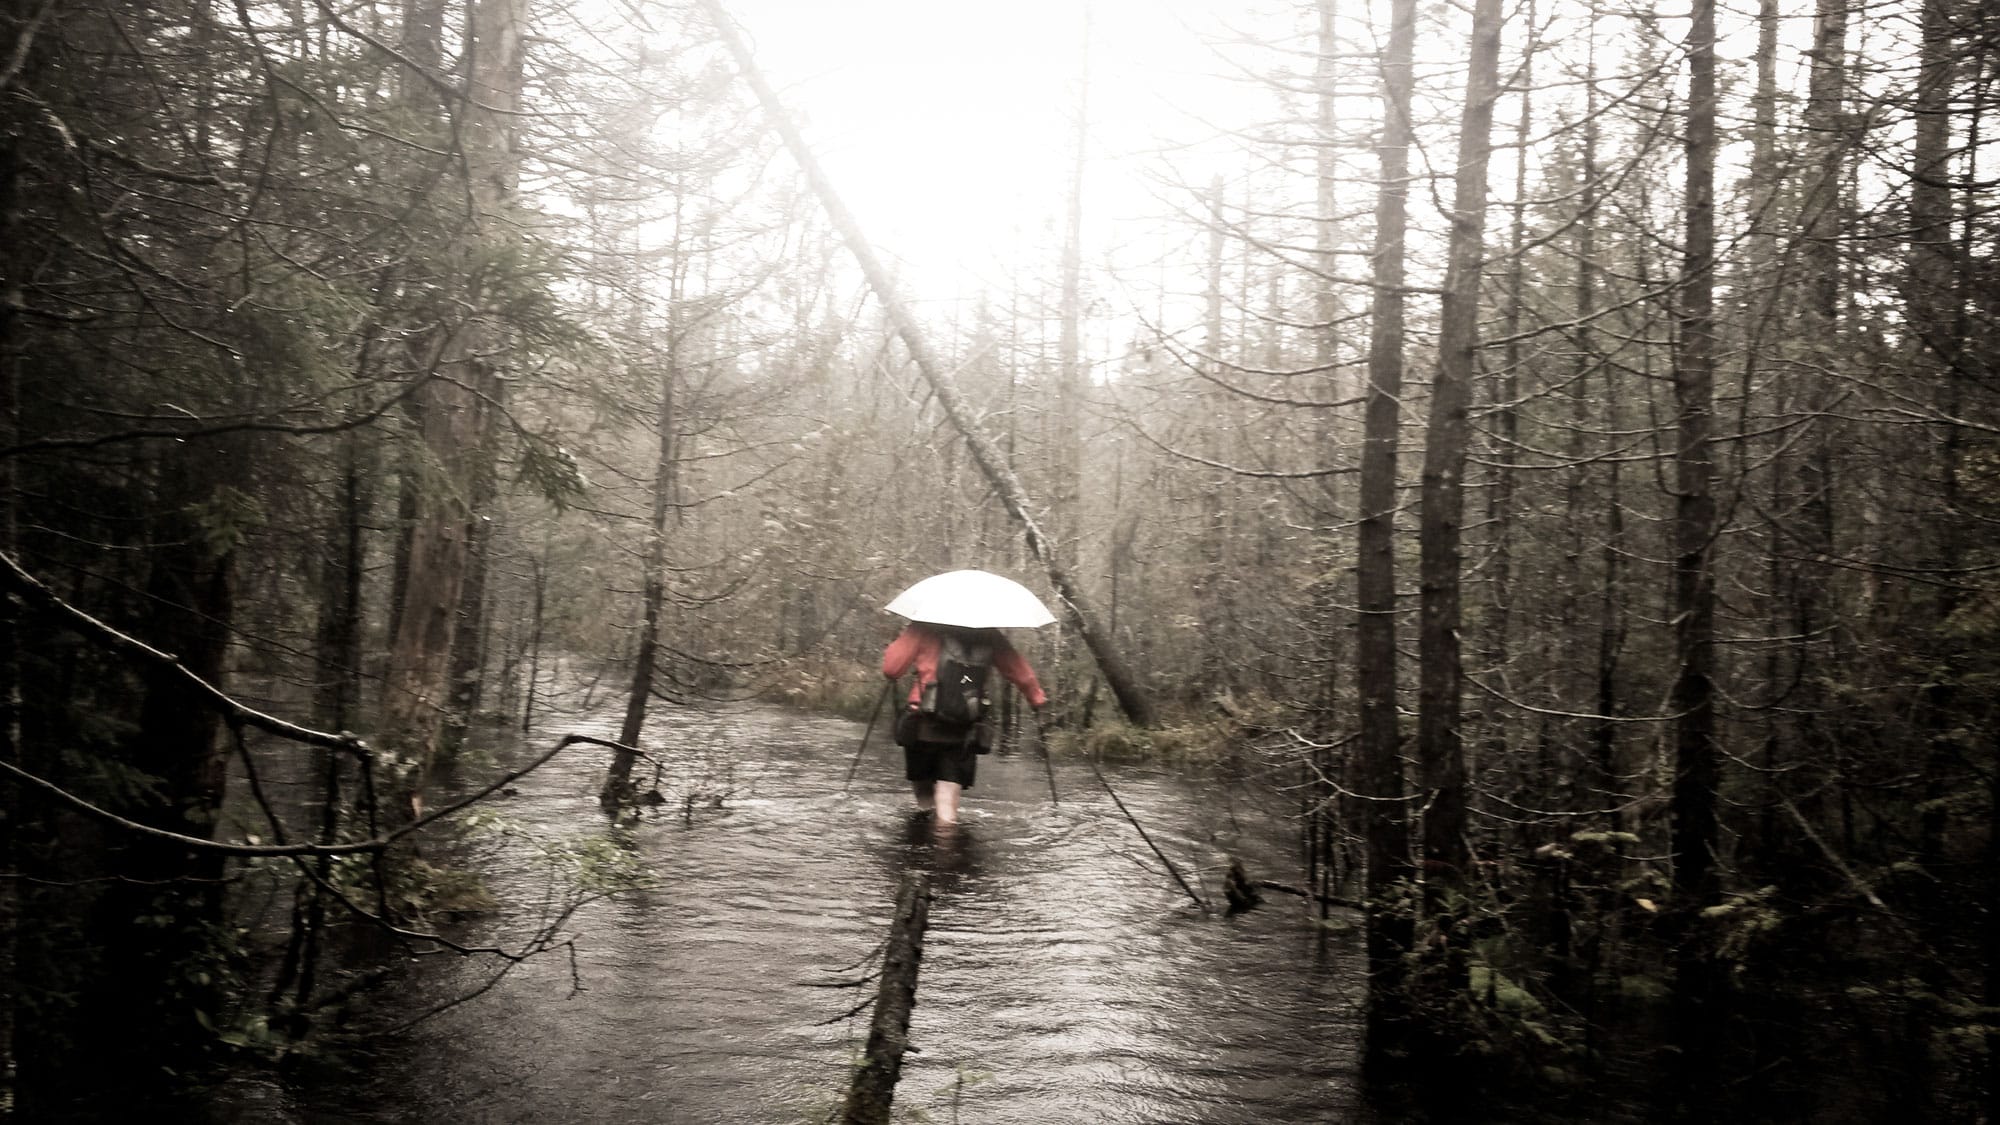 Damp conditions ultralight backpacking New York’s Adirondack Mountains | October, 2015